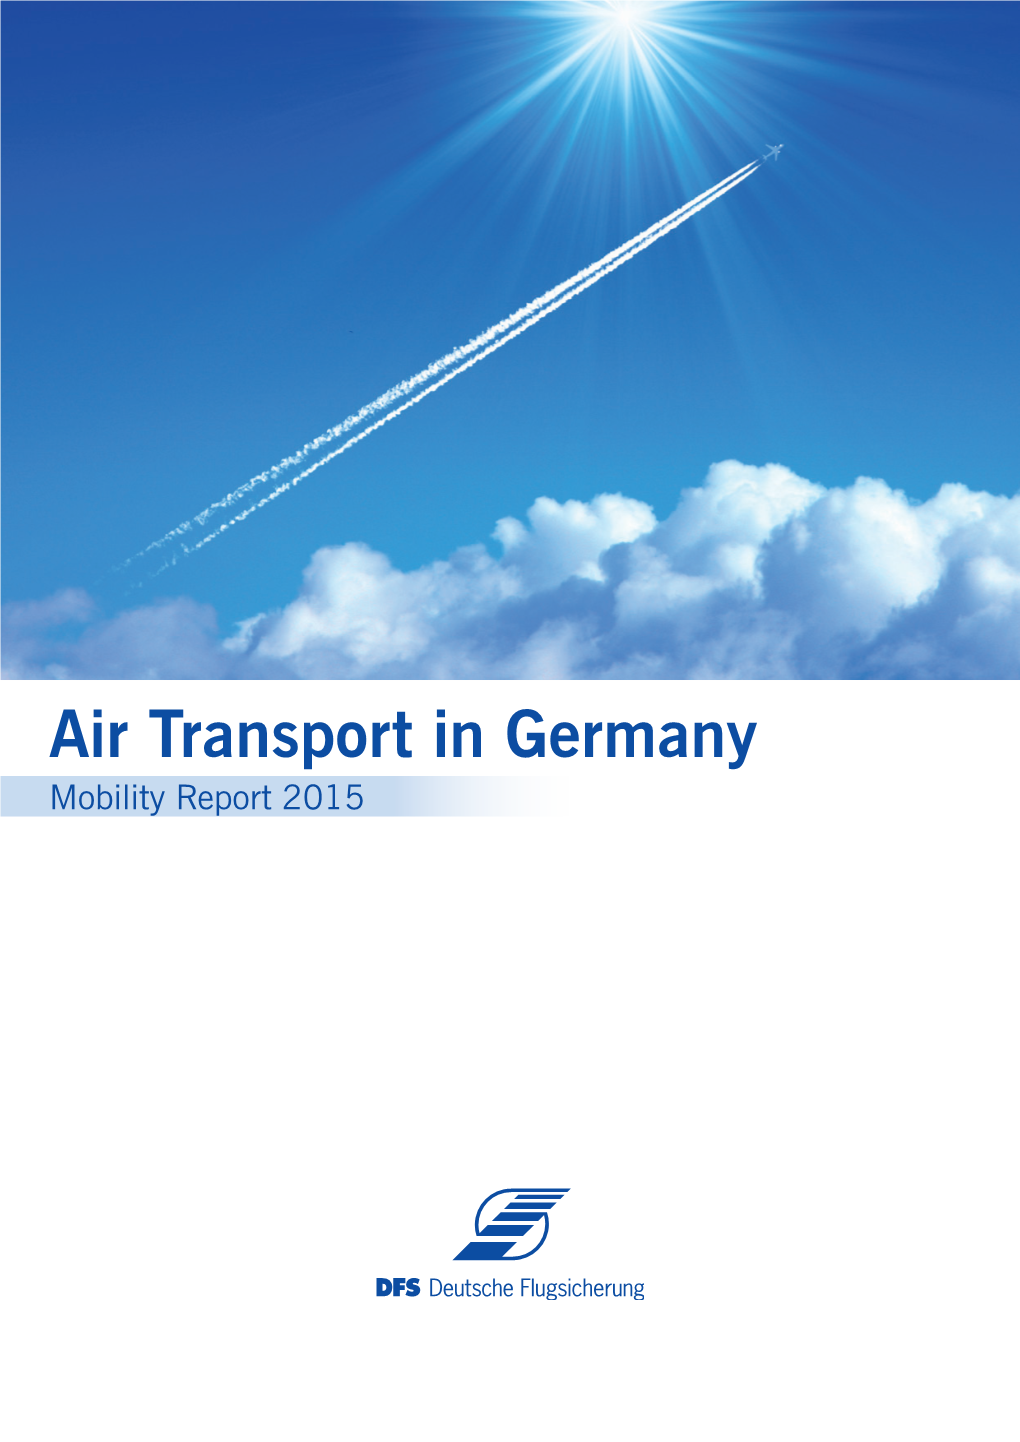 Air Transport in Germany